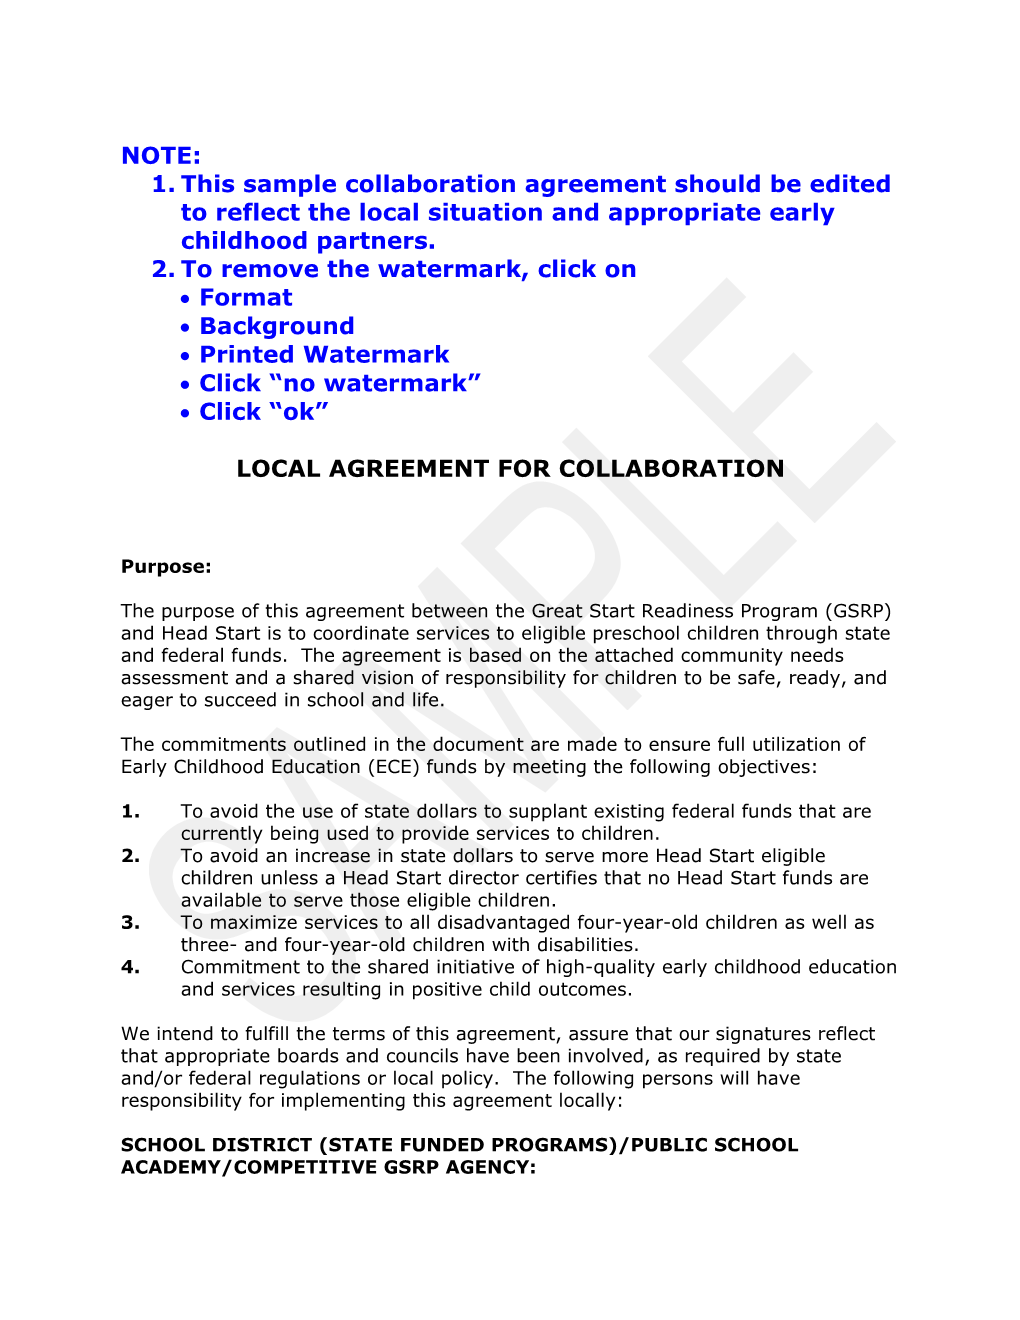 Local Agreement For Collaboration